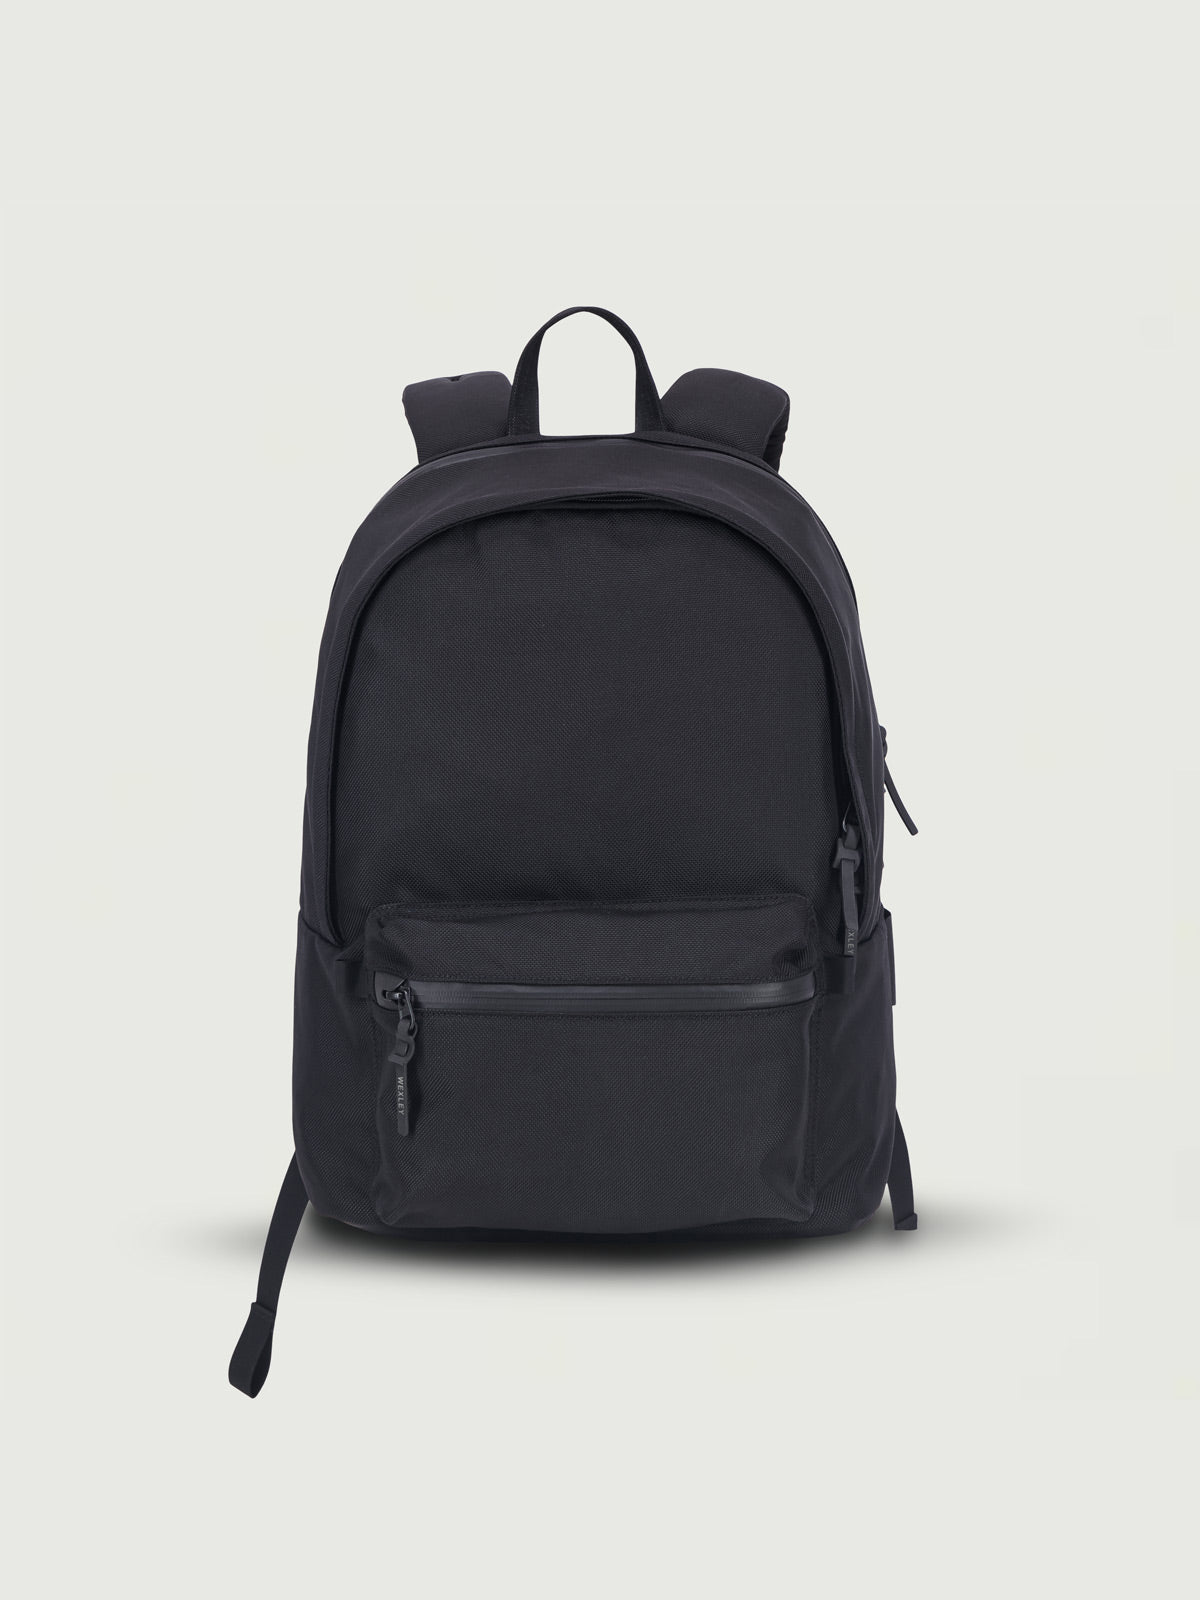 CLASSIC | THE ICONIC DAYPACK